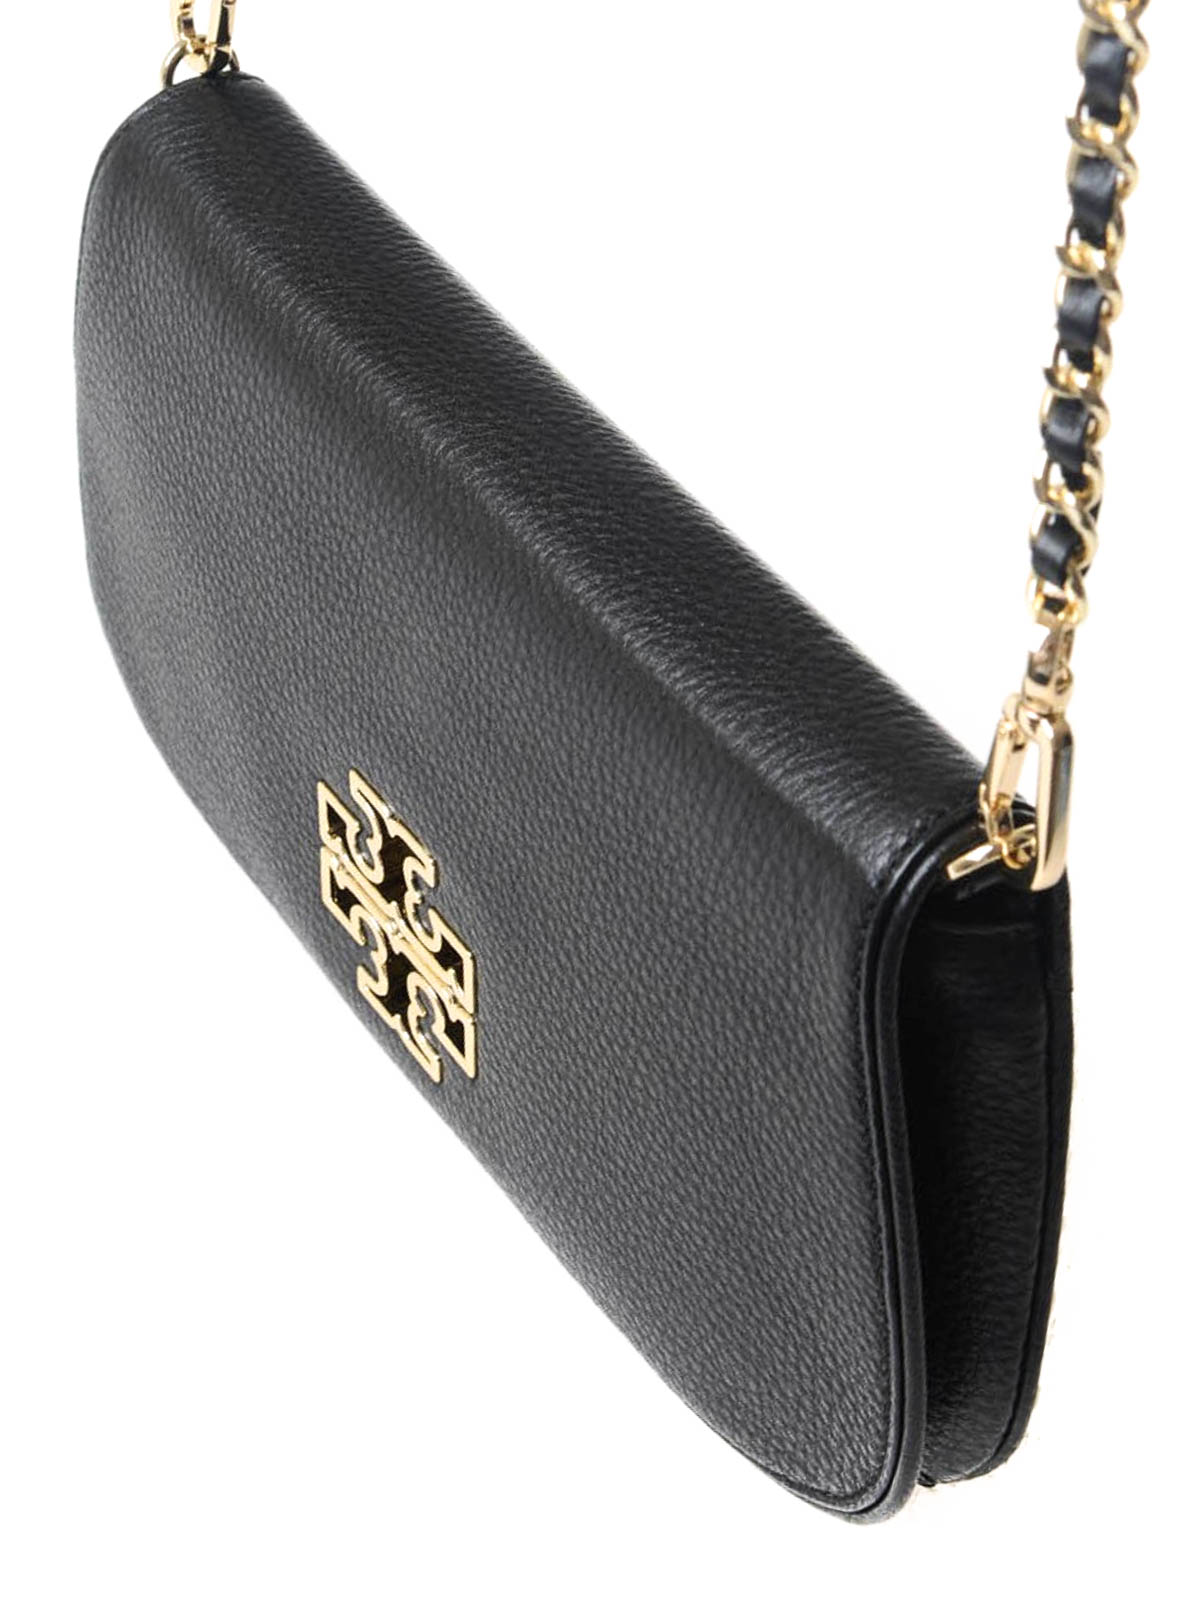 Clutches Tory Burch - Leather clutch bag - 29861001 | Shop online at iKRIX